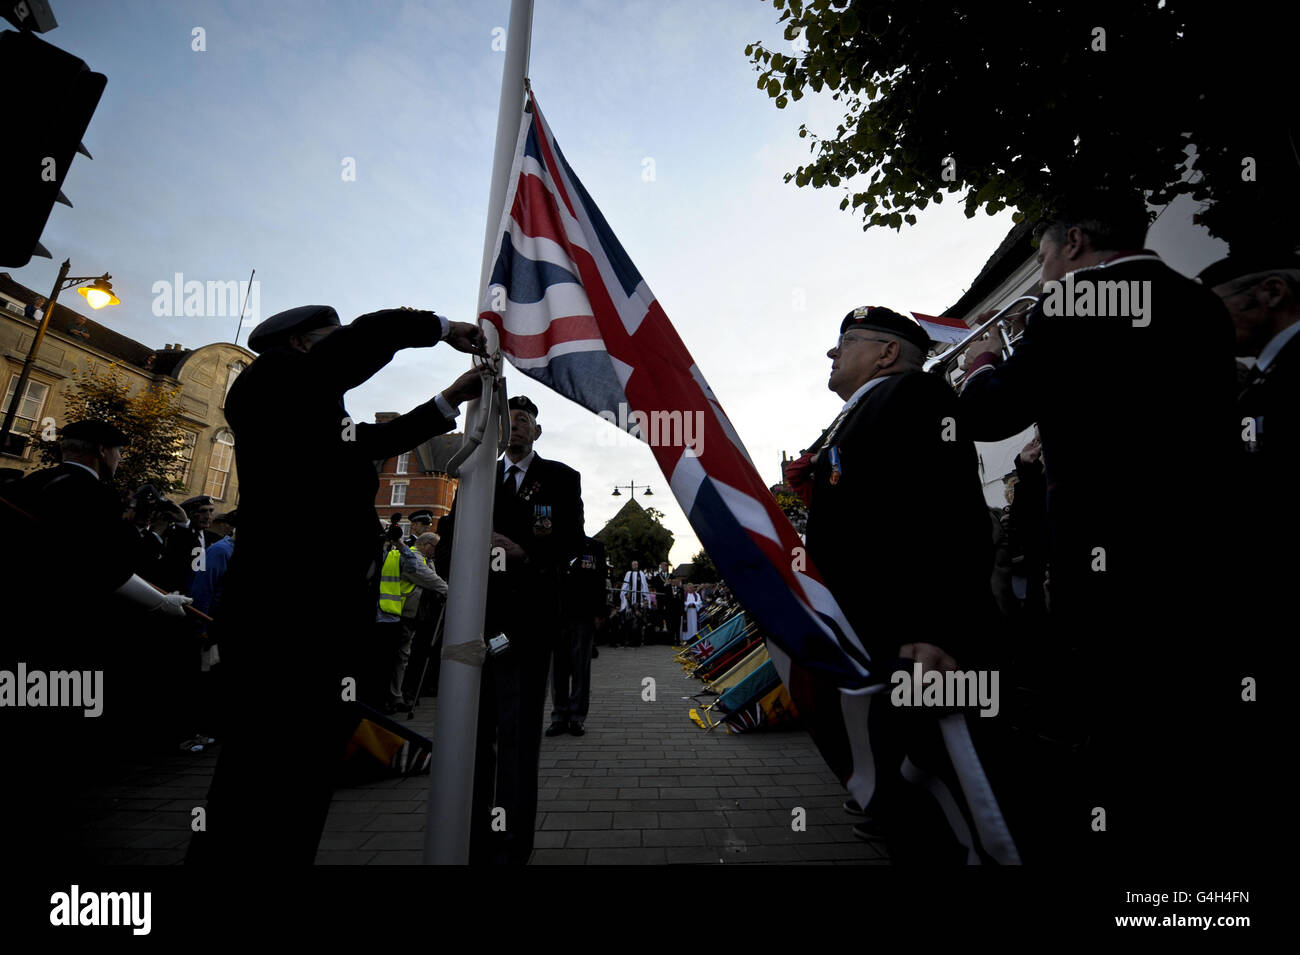 The official flag party stand beneath the Union flag as it is lowered for the last time on the High Street of Wootton Bassett as they hand over the ceremonial flag to Oxford where the bodies of fallen servicemen will now be repatriated into the UK at RAF Brize Norton. Stock Photo